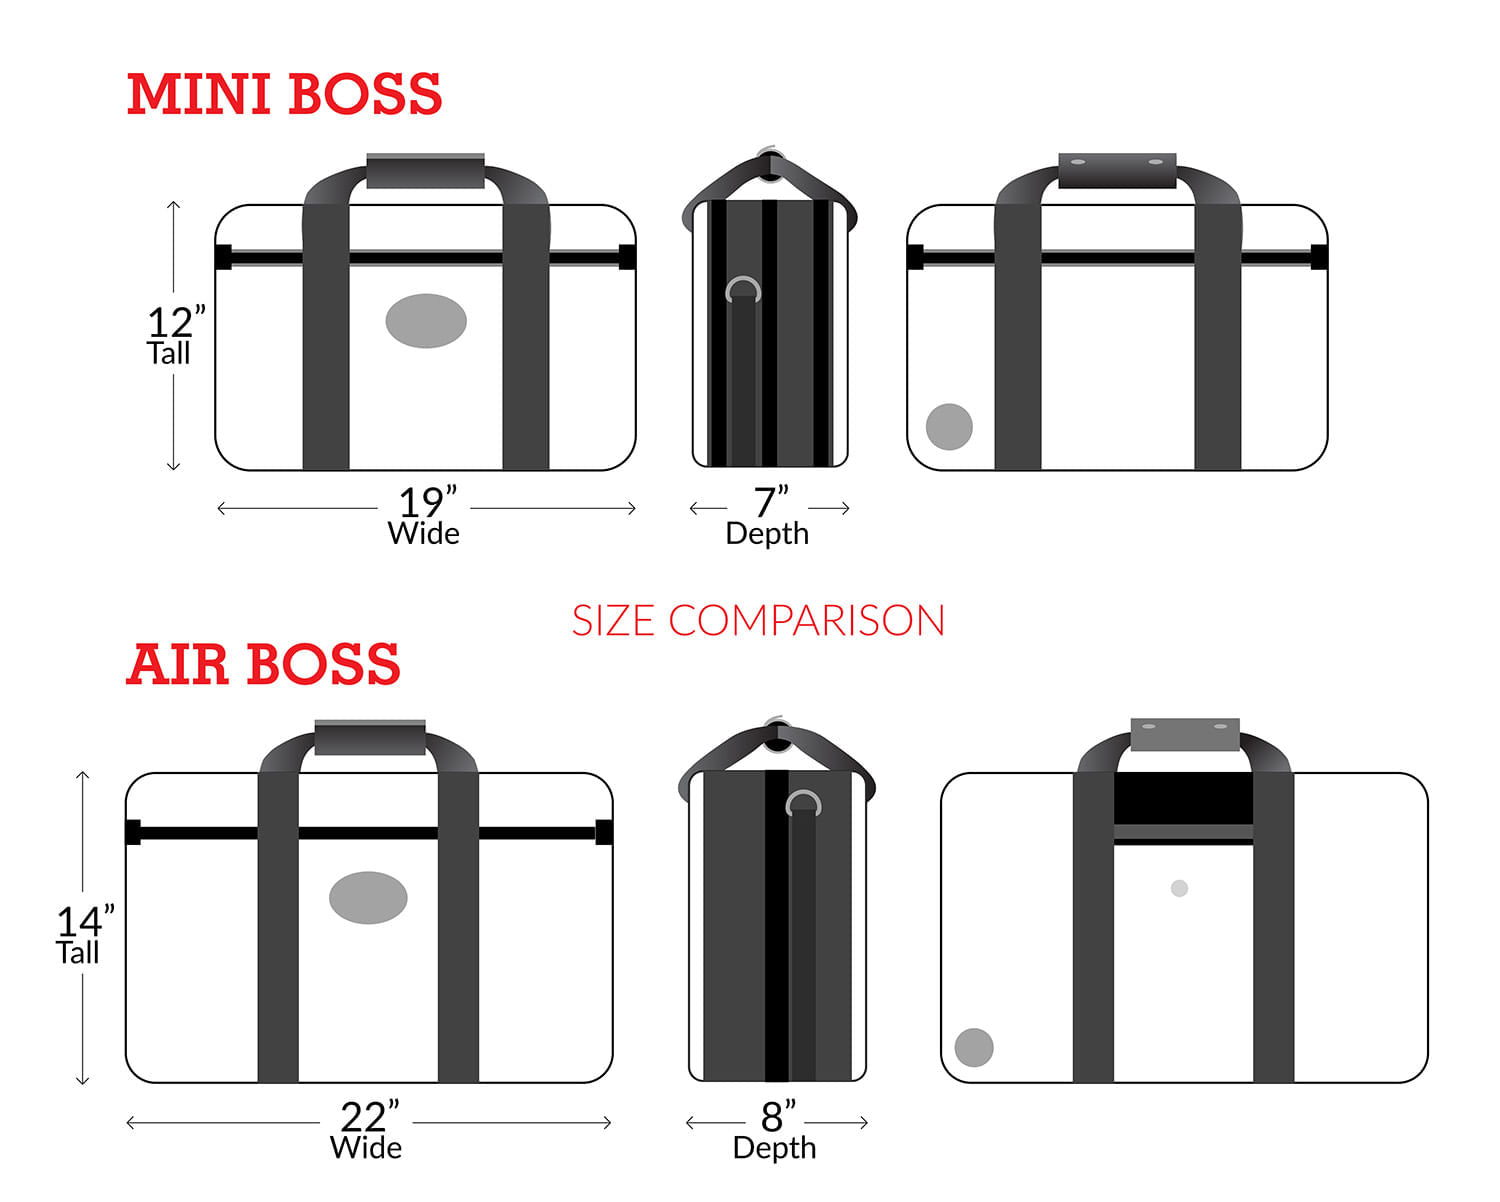 From top to bottom comparison of Mini Boss to Air Boss simplified. 